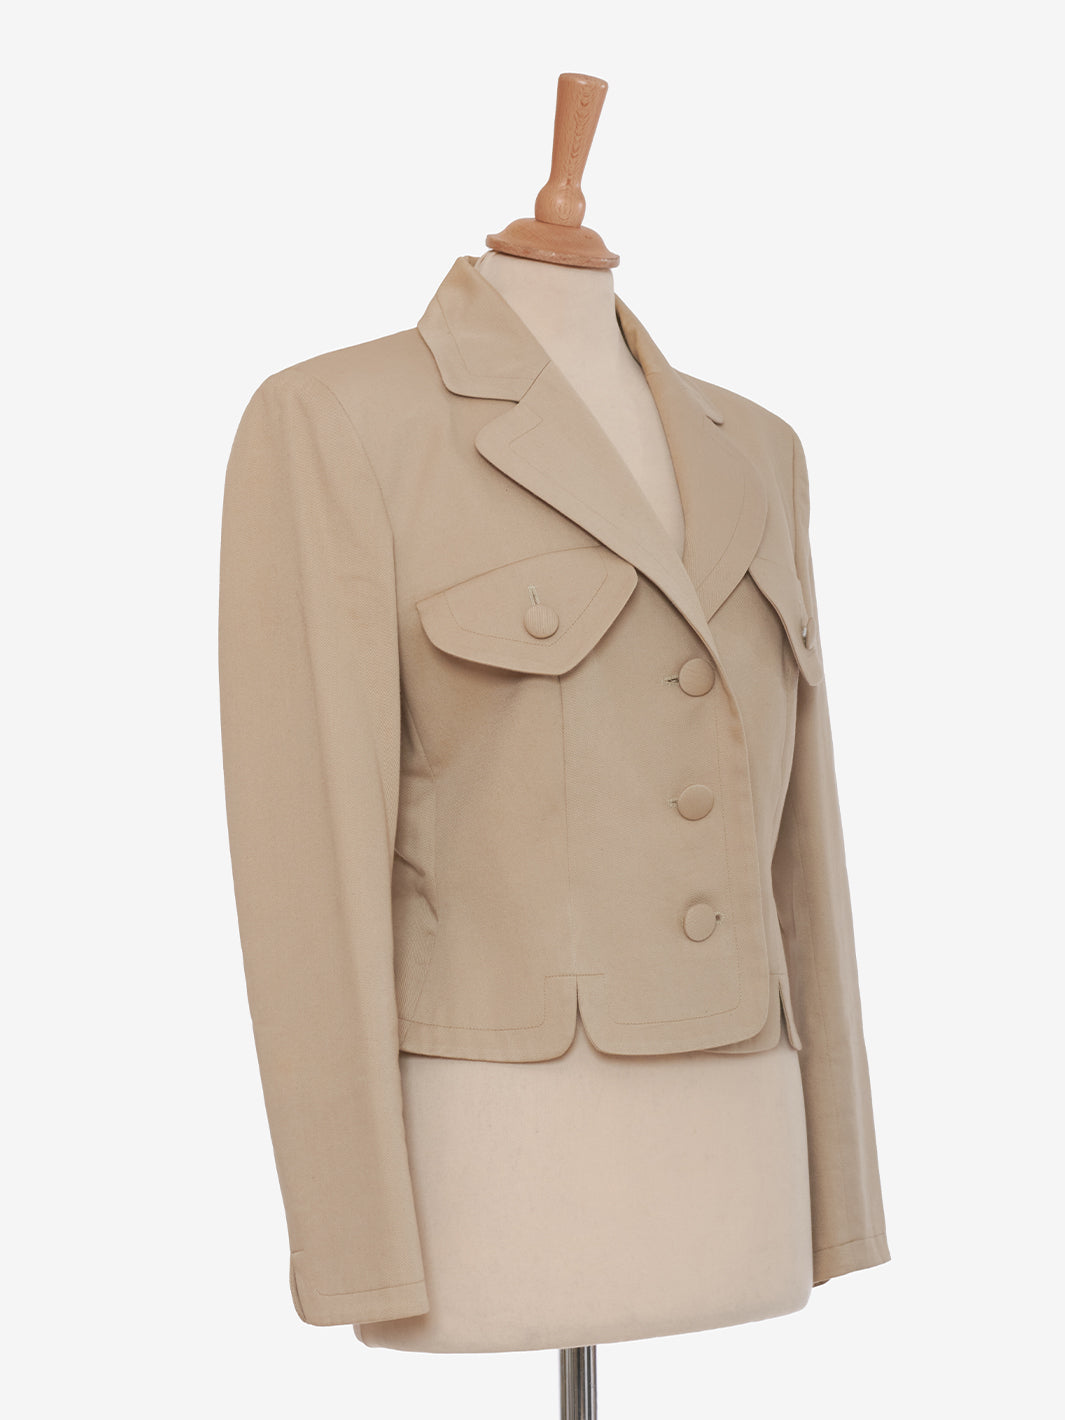 Moschino Cheap and Chic Beige Cotton Suit